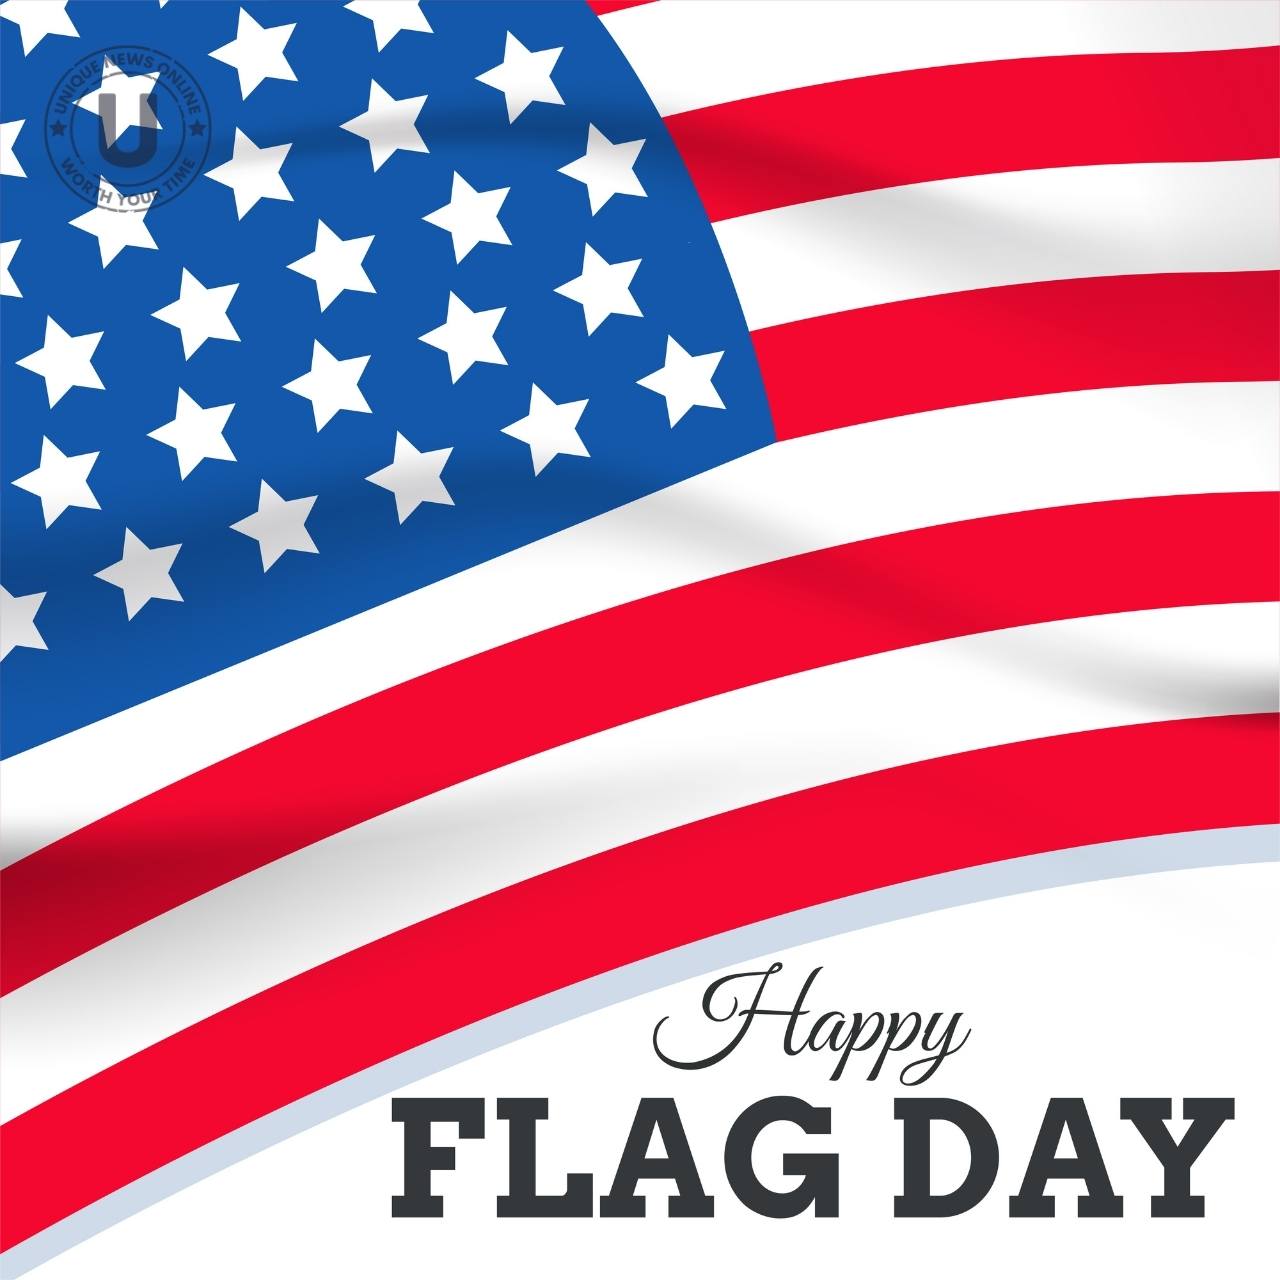 US Flag Day 2022 Top Quotes, Images, Wishes, Sayings, Messages, and